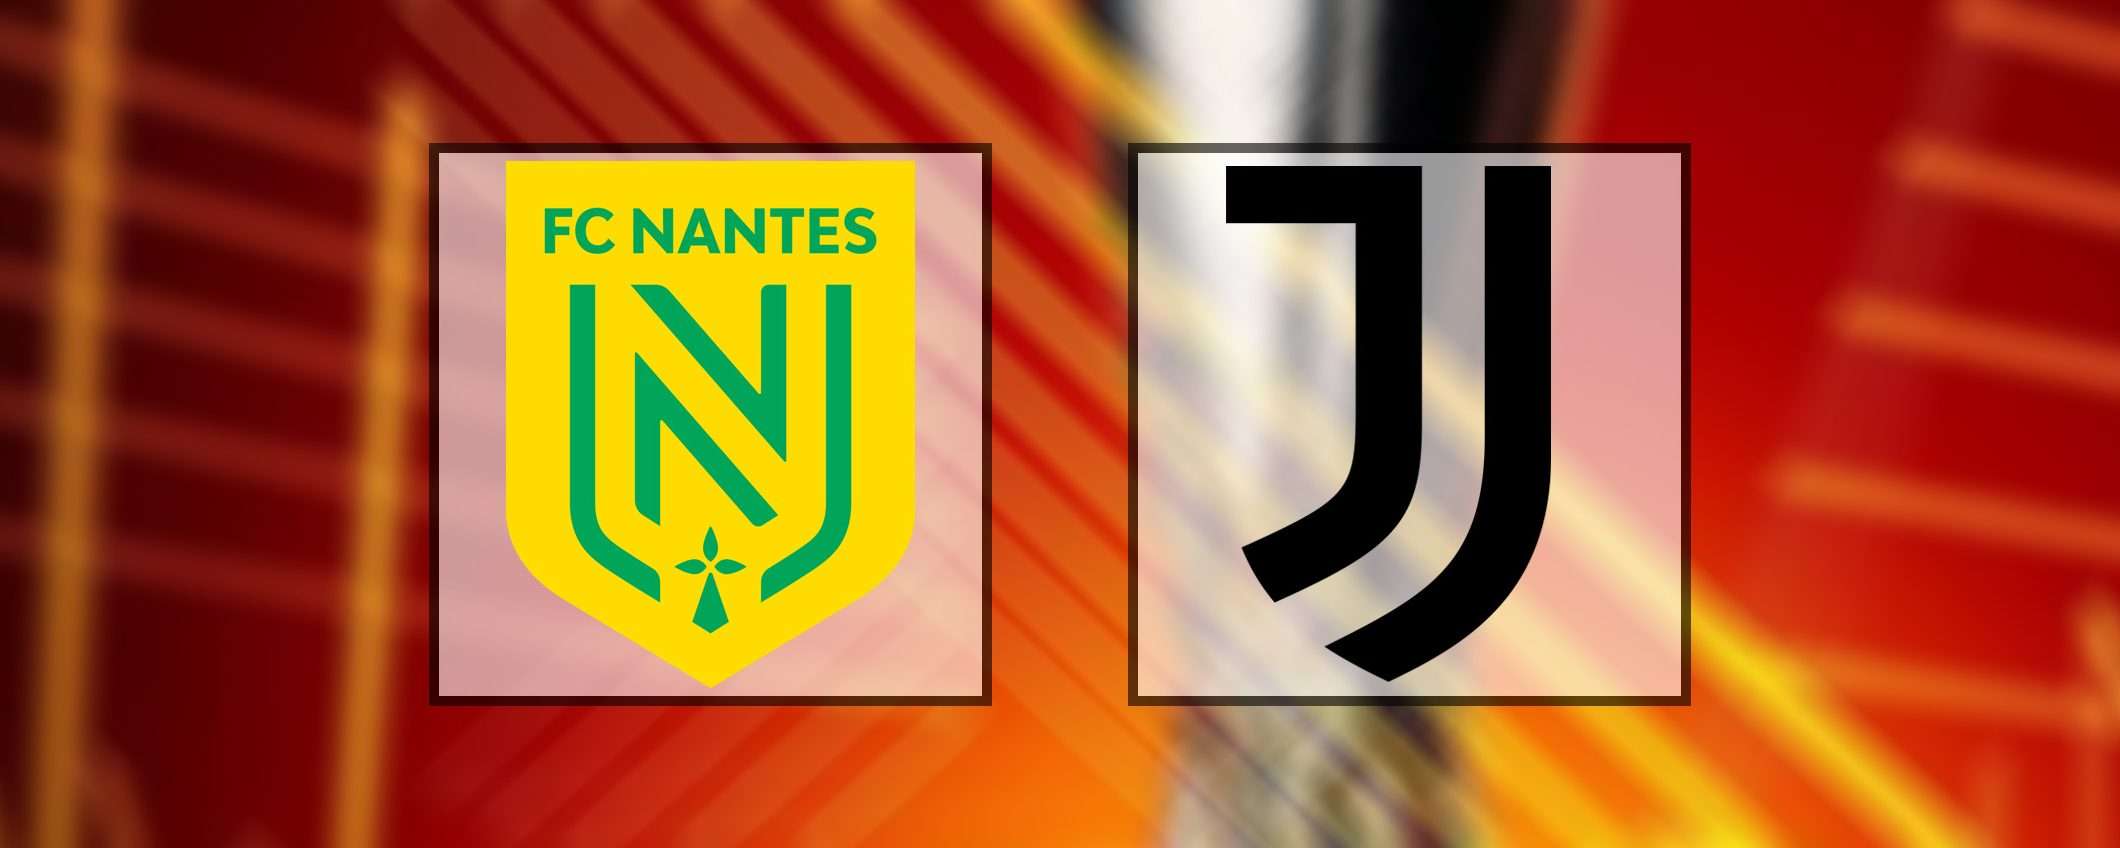 Come vedere Nantes-Juventus in streaming